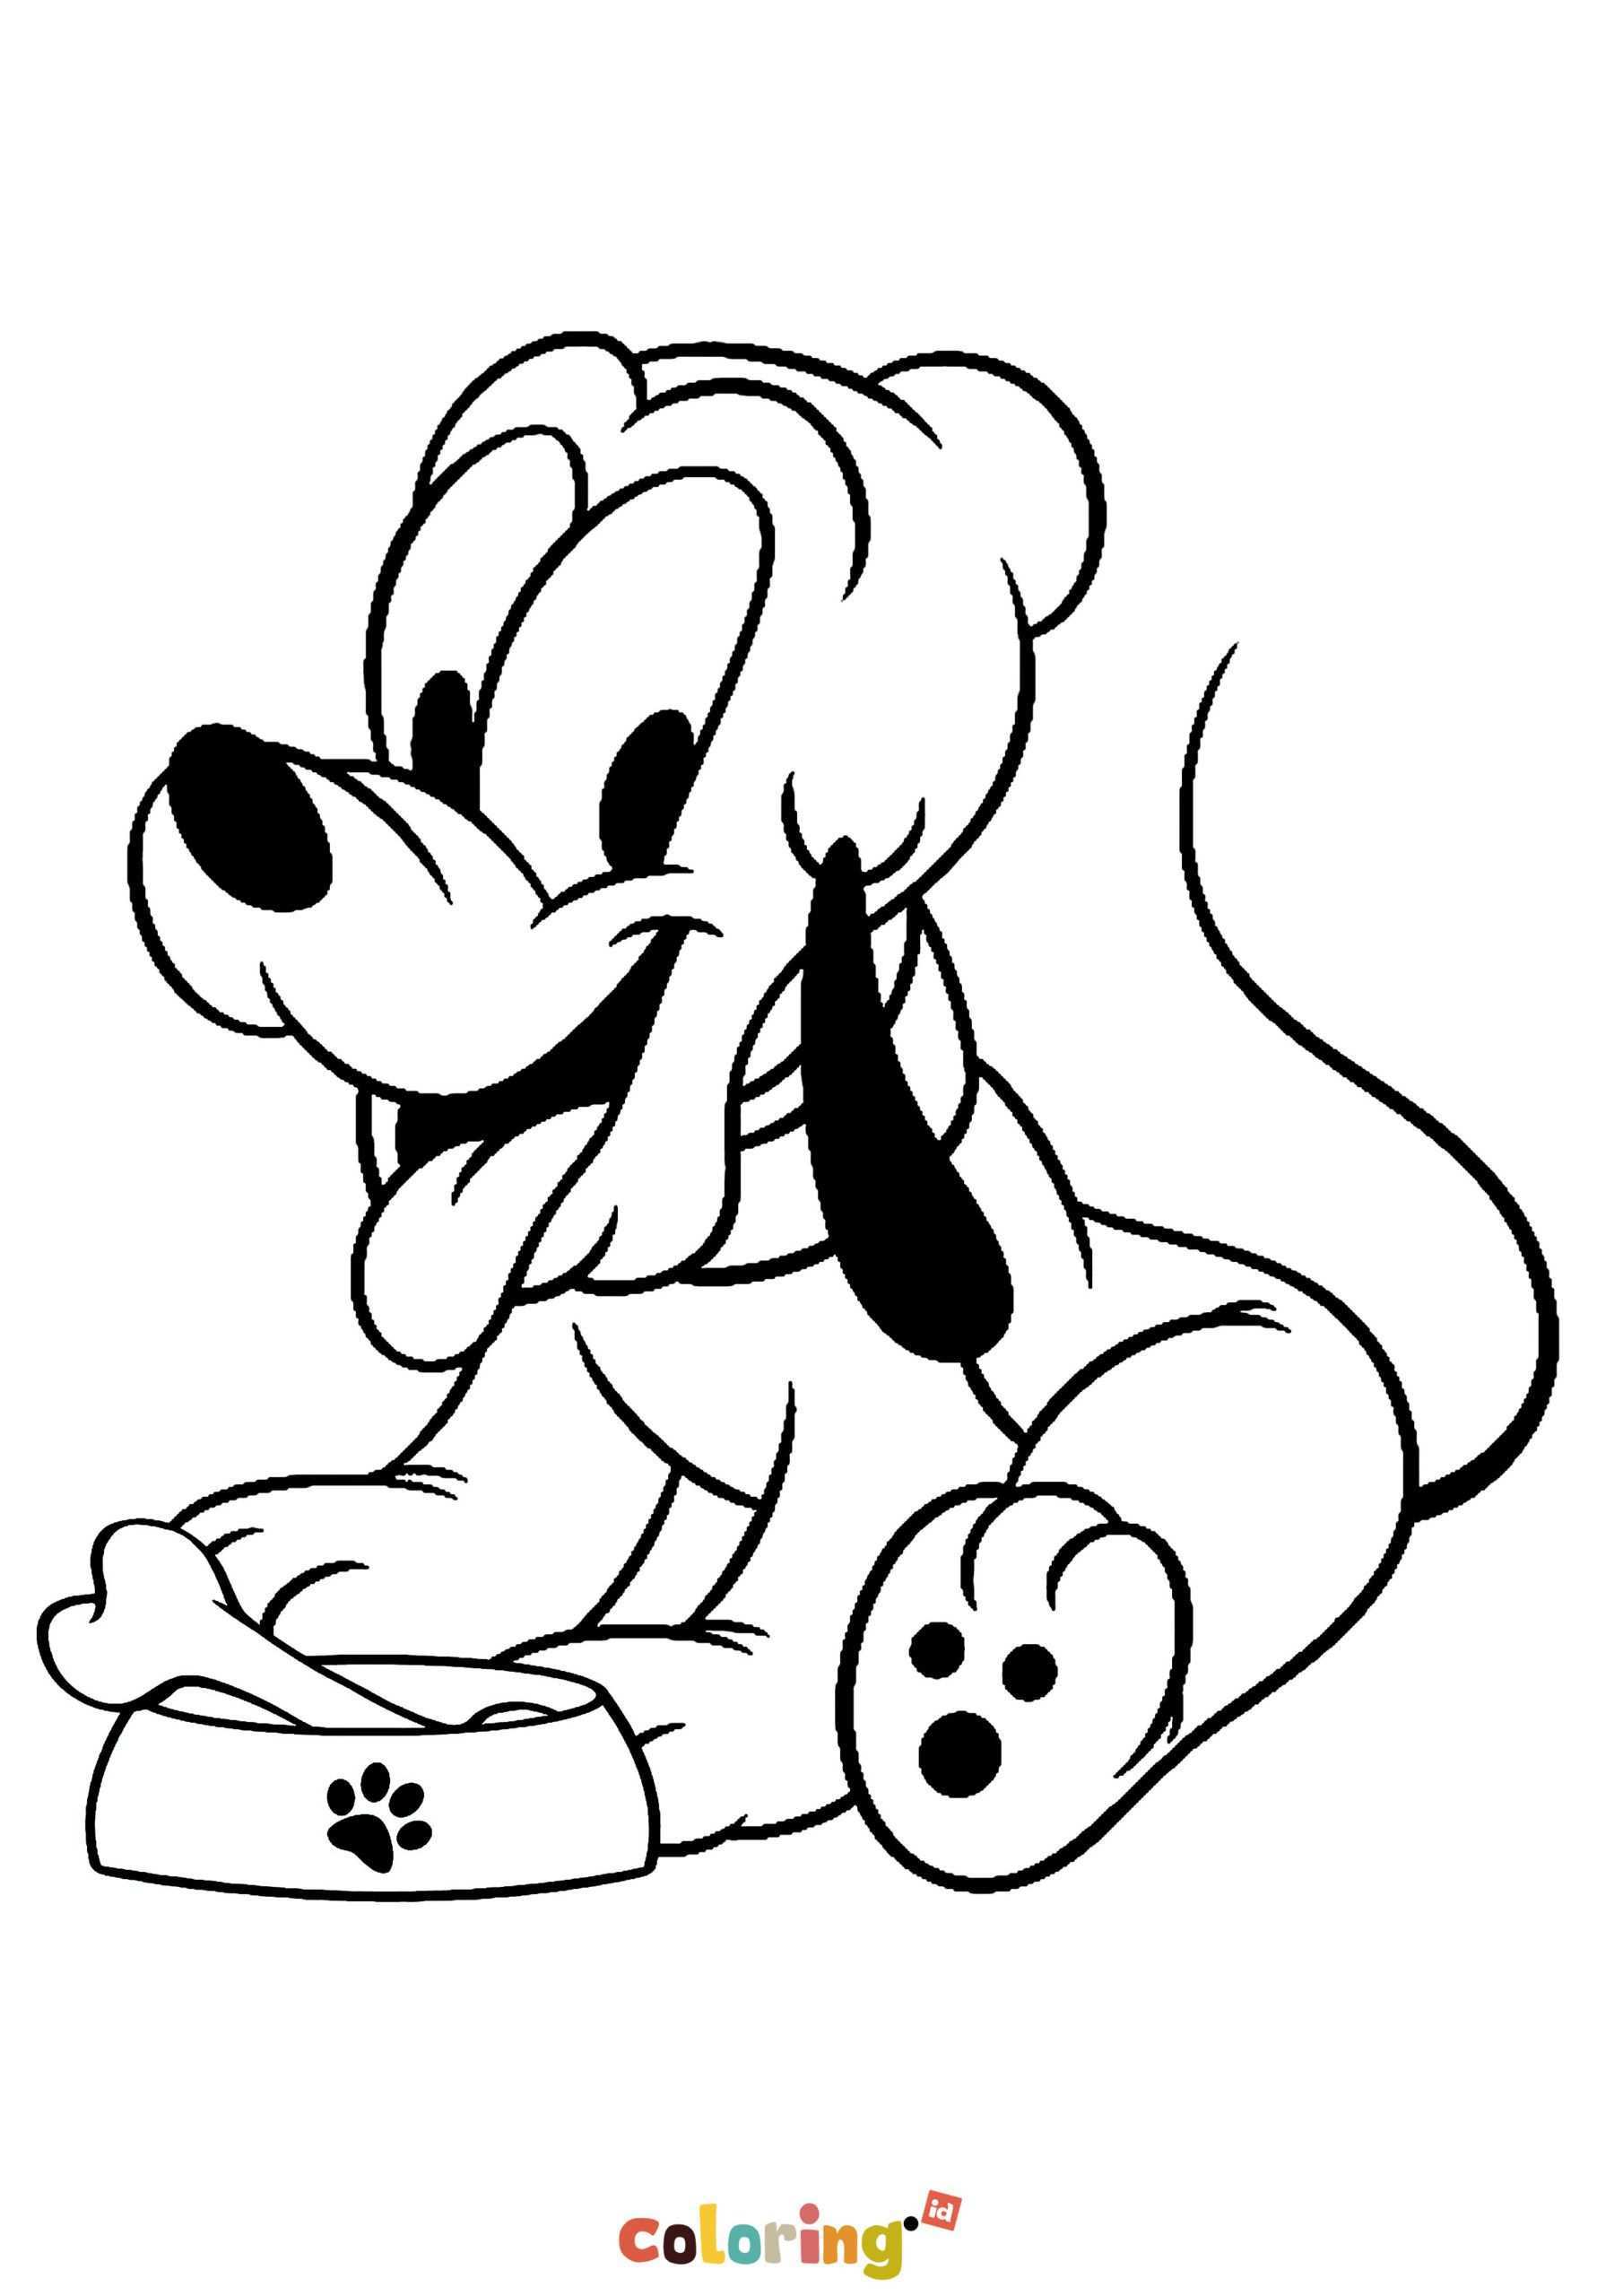 Baby Dog Disney Character Coloring Page Free Printable Disney Coloring Pages Featuri Mickey Coloring Pages Mickey Mouse Coloring Pages Baby Disney Characters